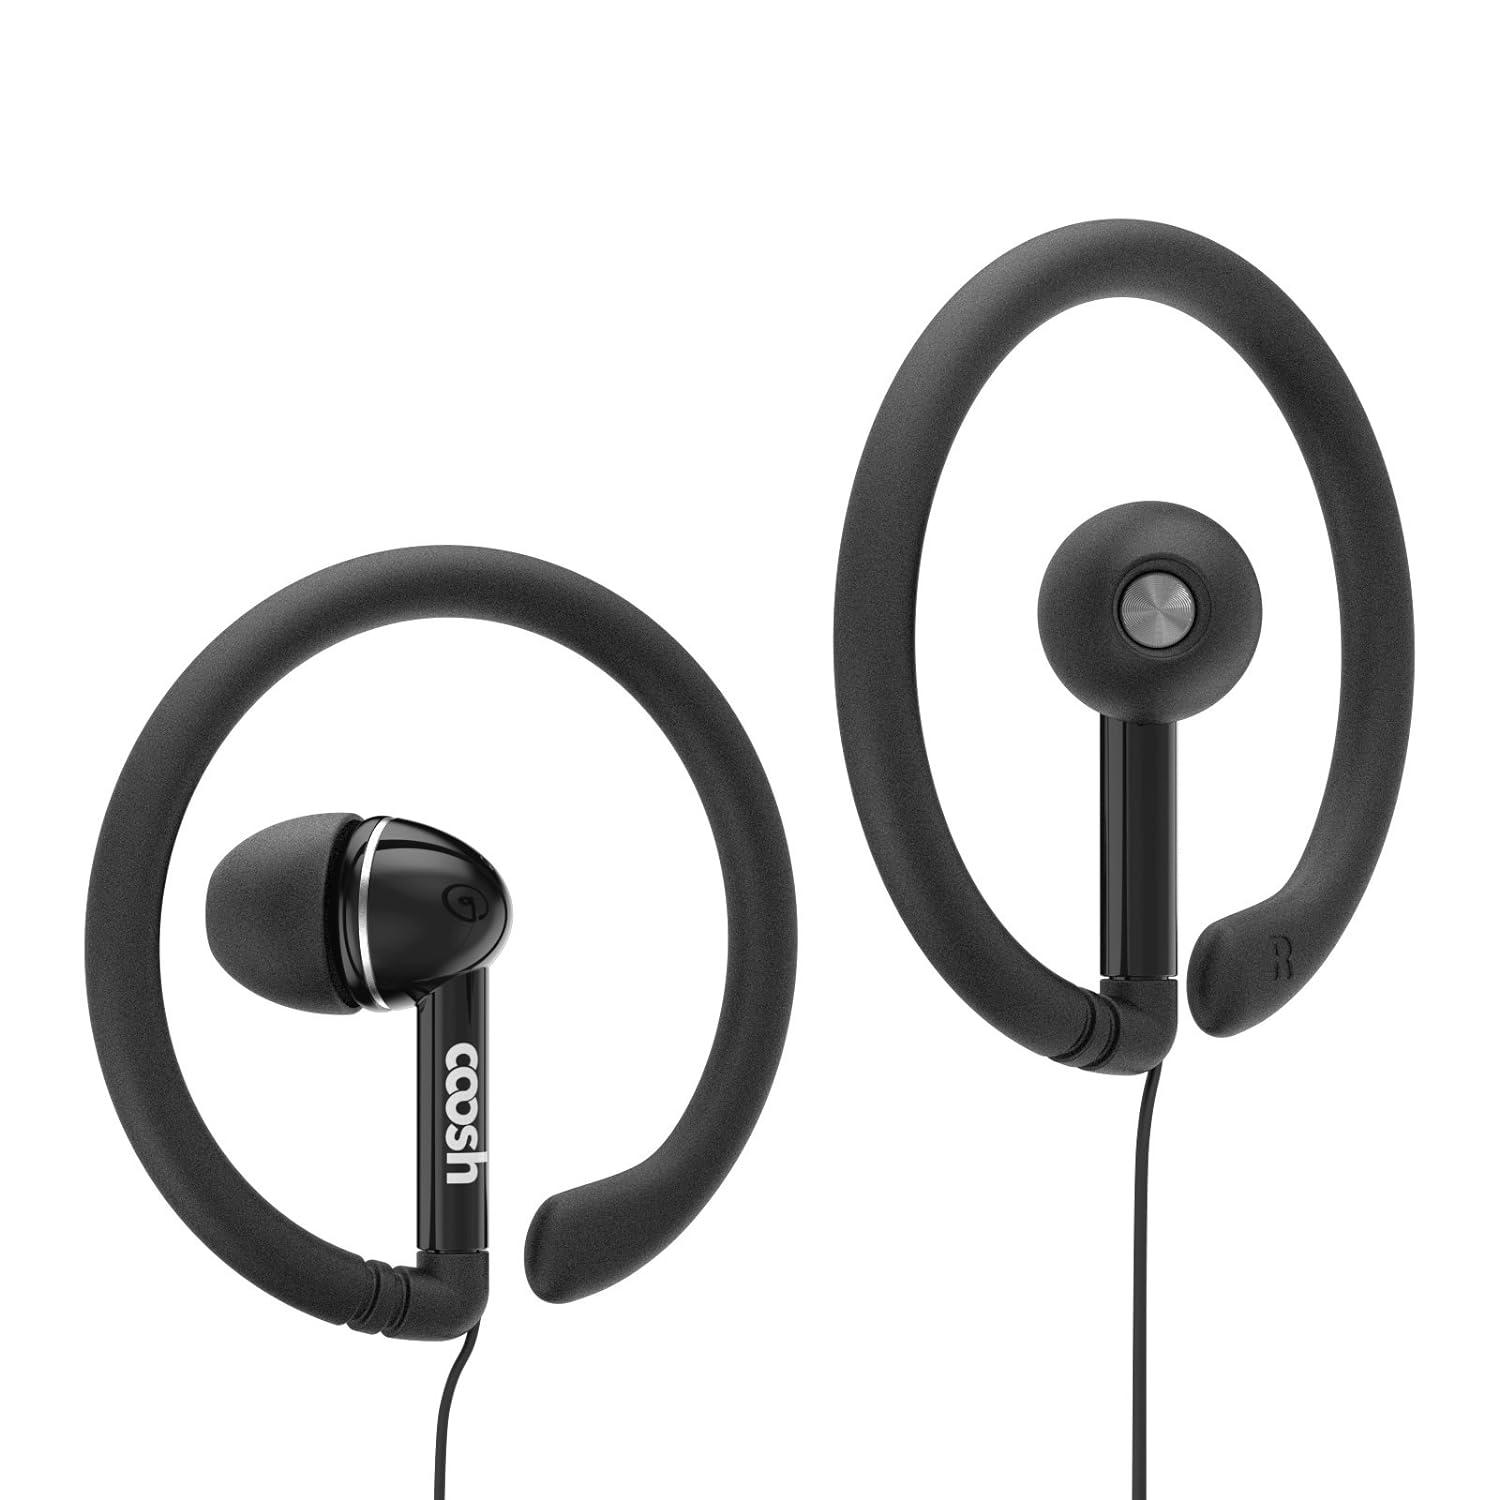 coosh adib071sg3b1l wired comfort in-ear earbuds headphones with removable earhooks (black)